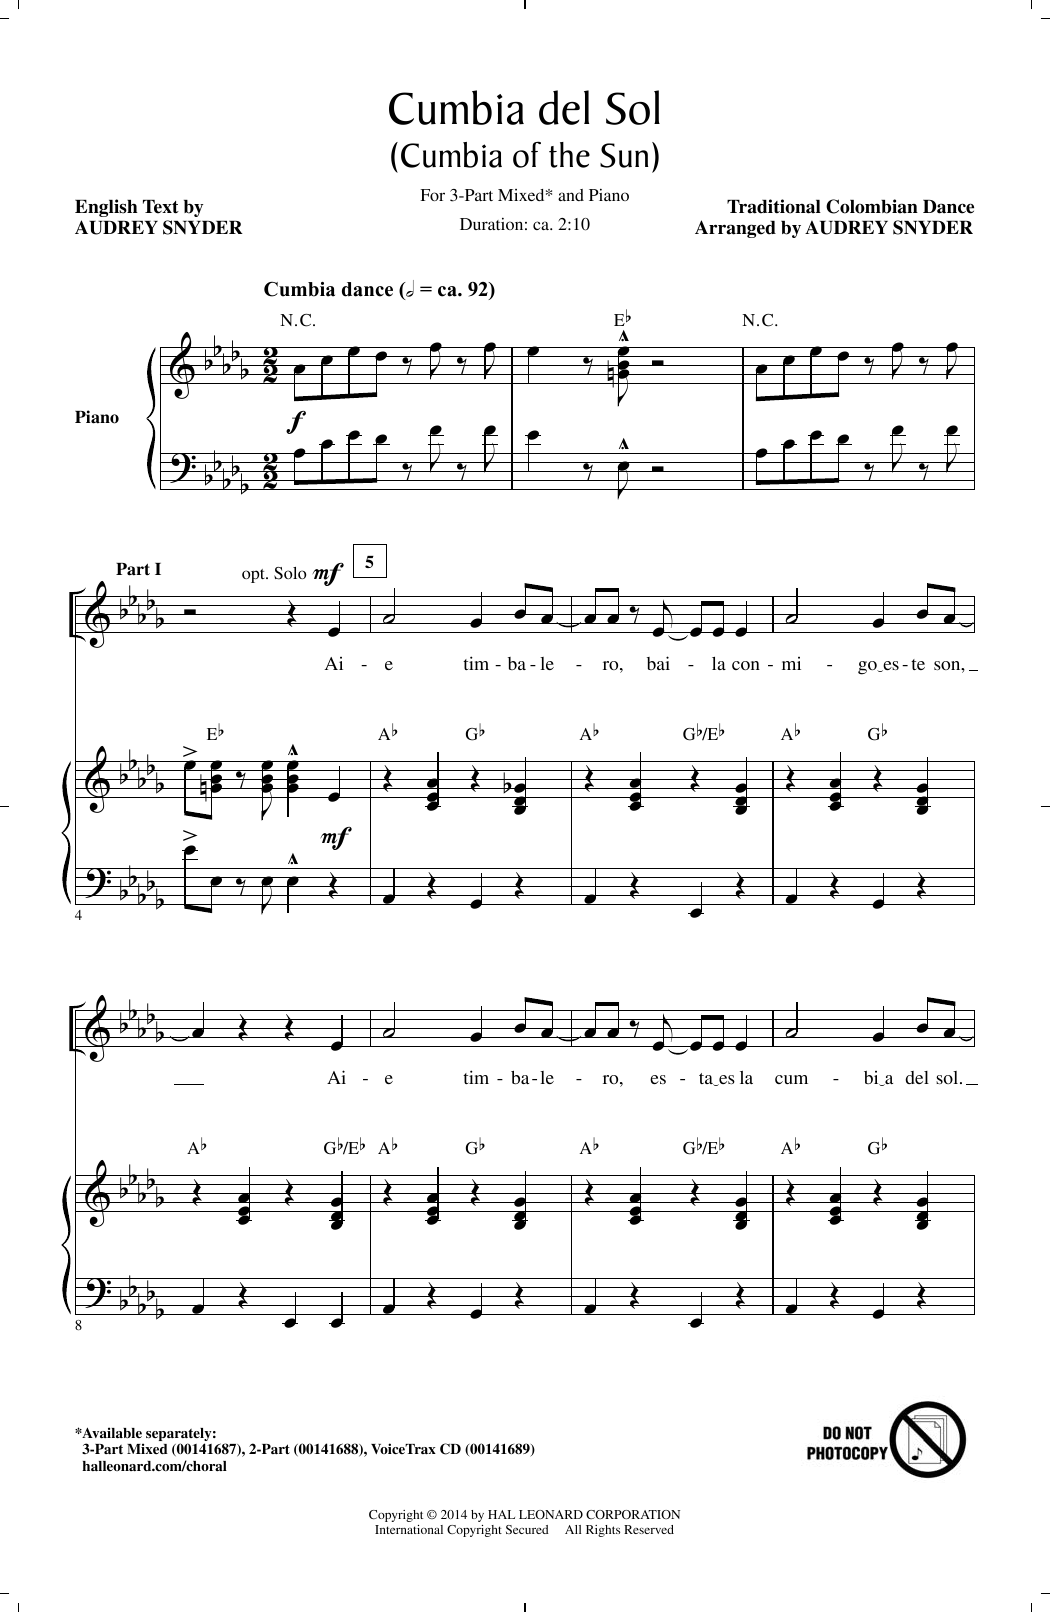 Download Audrey Snyder Cumbia Del Sol (Cumbia Of The Sun) Sheet Music